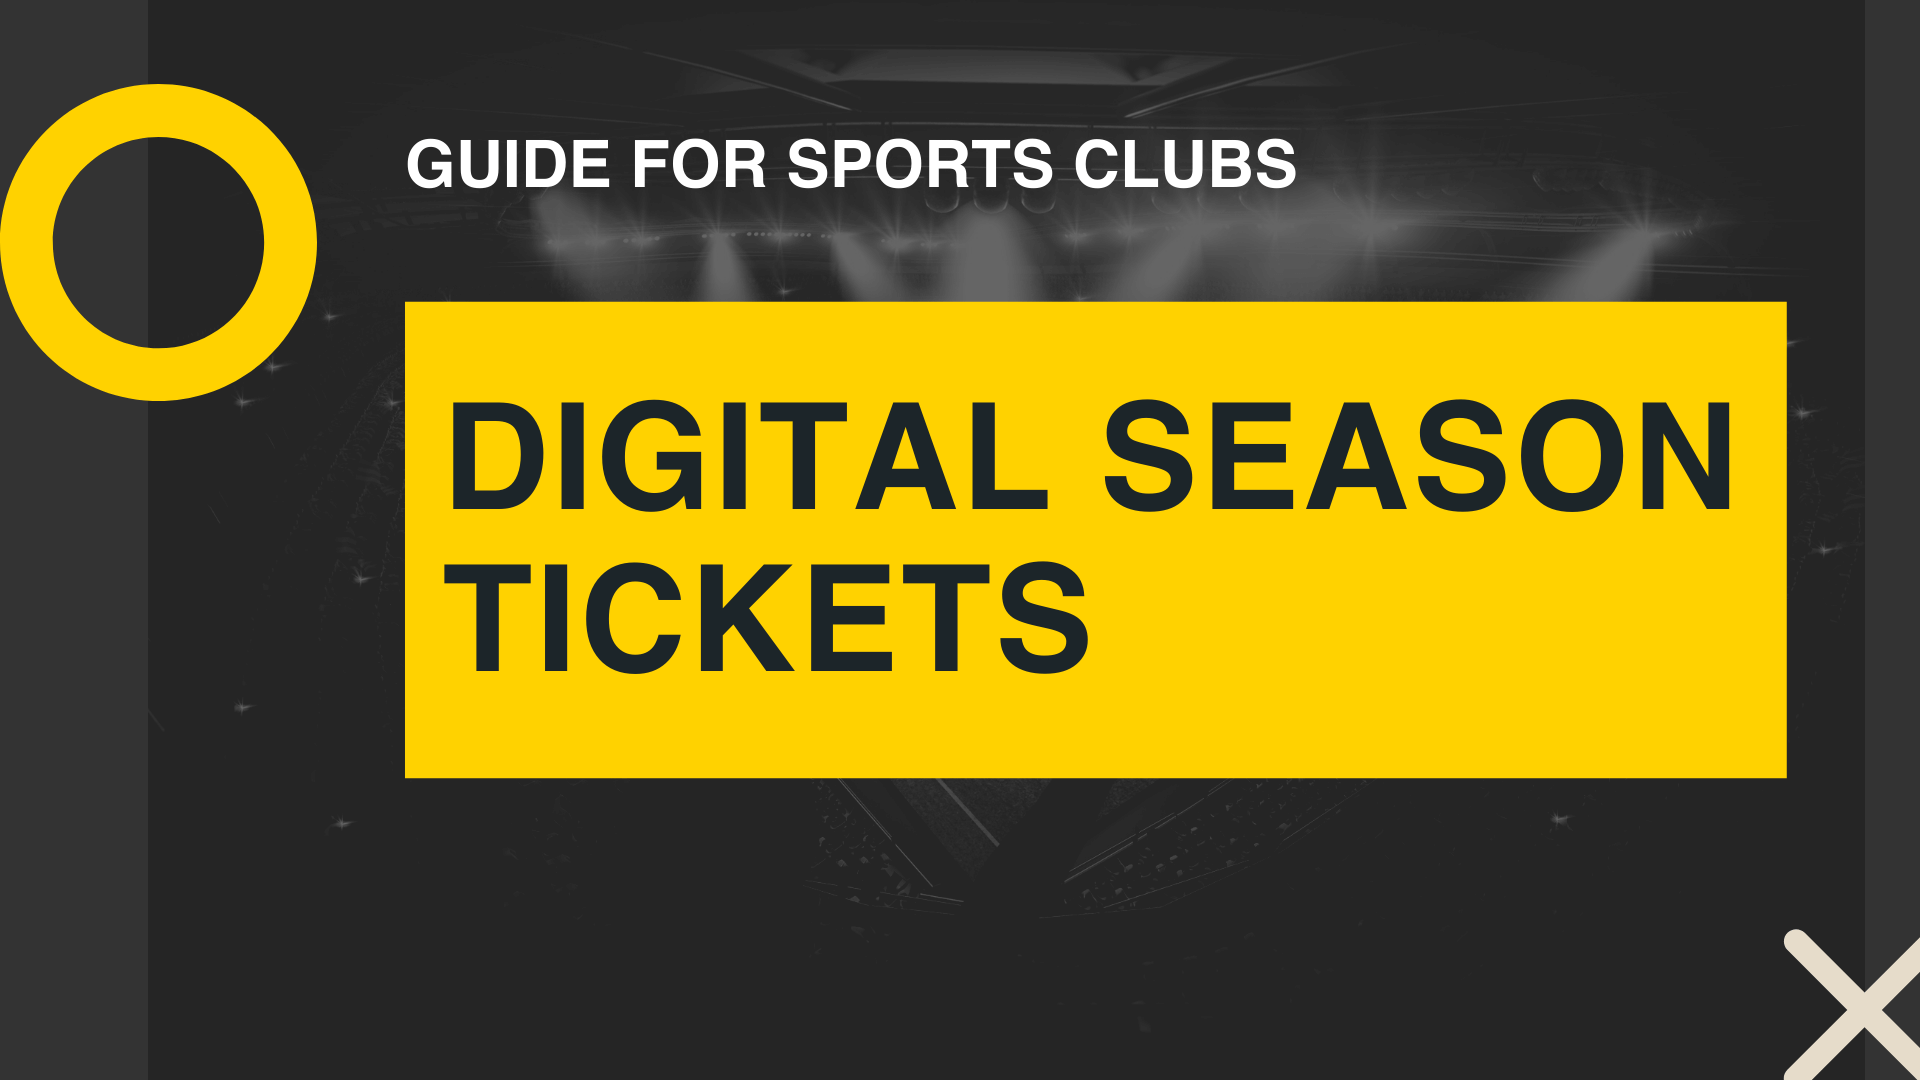 SEASON TICKET SALES FOR THE GROUP STAGE HAVE